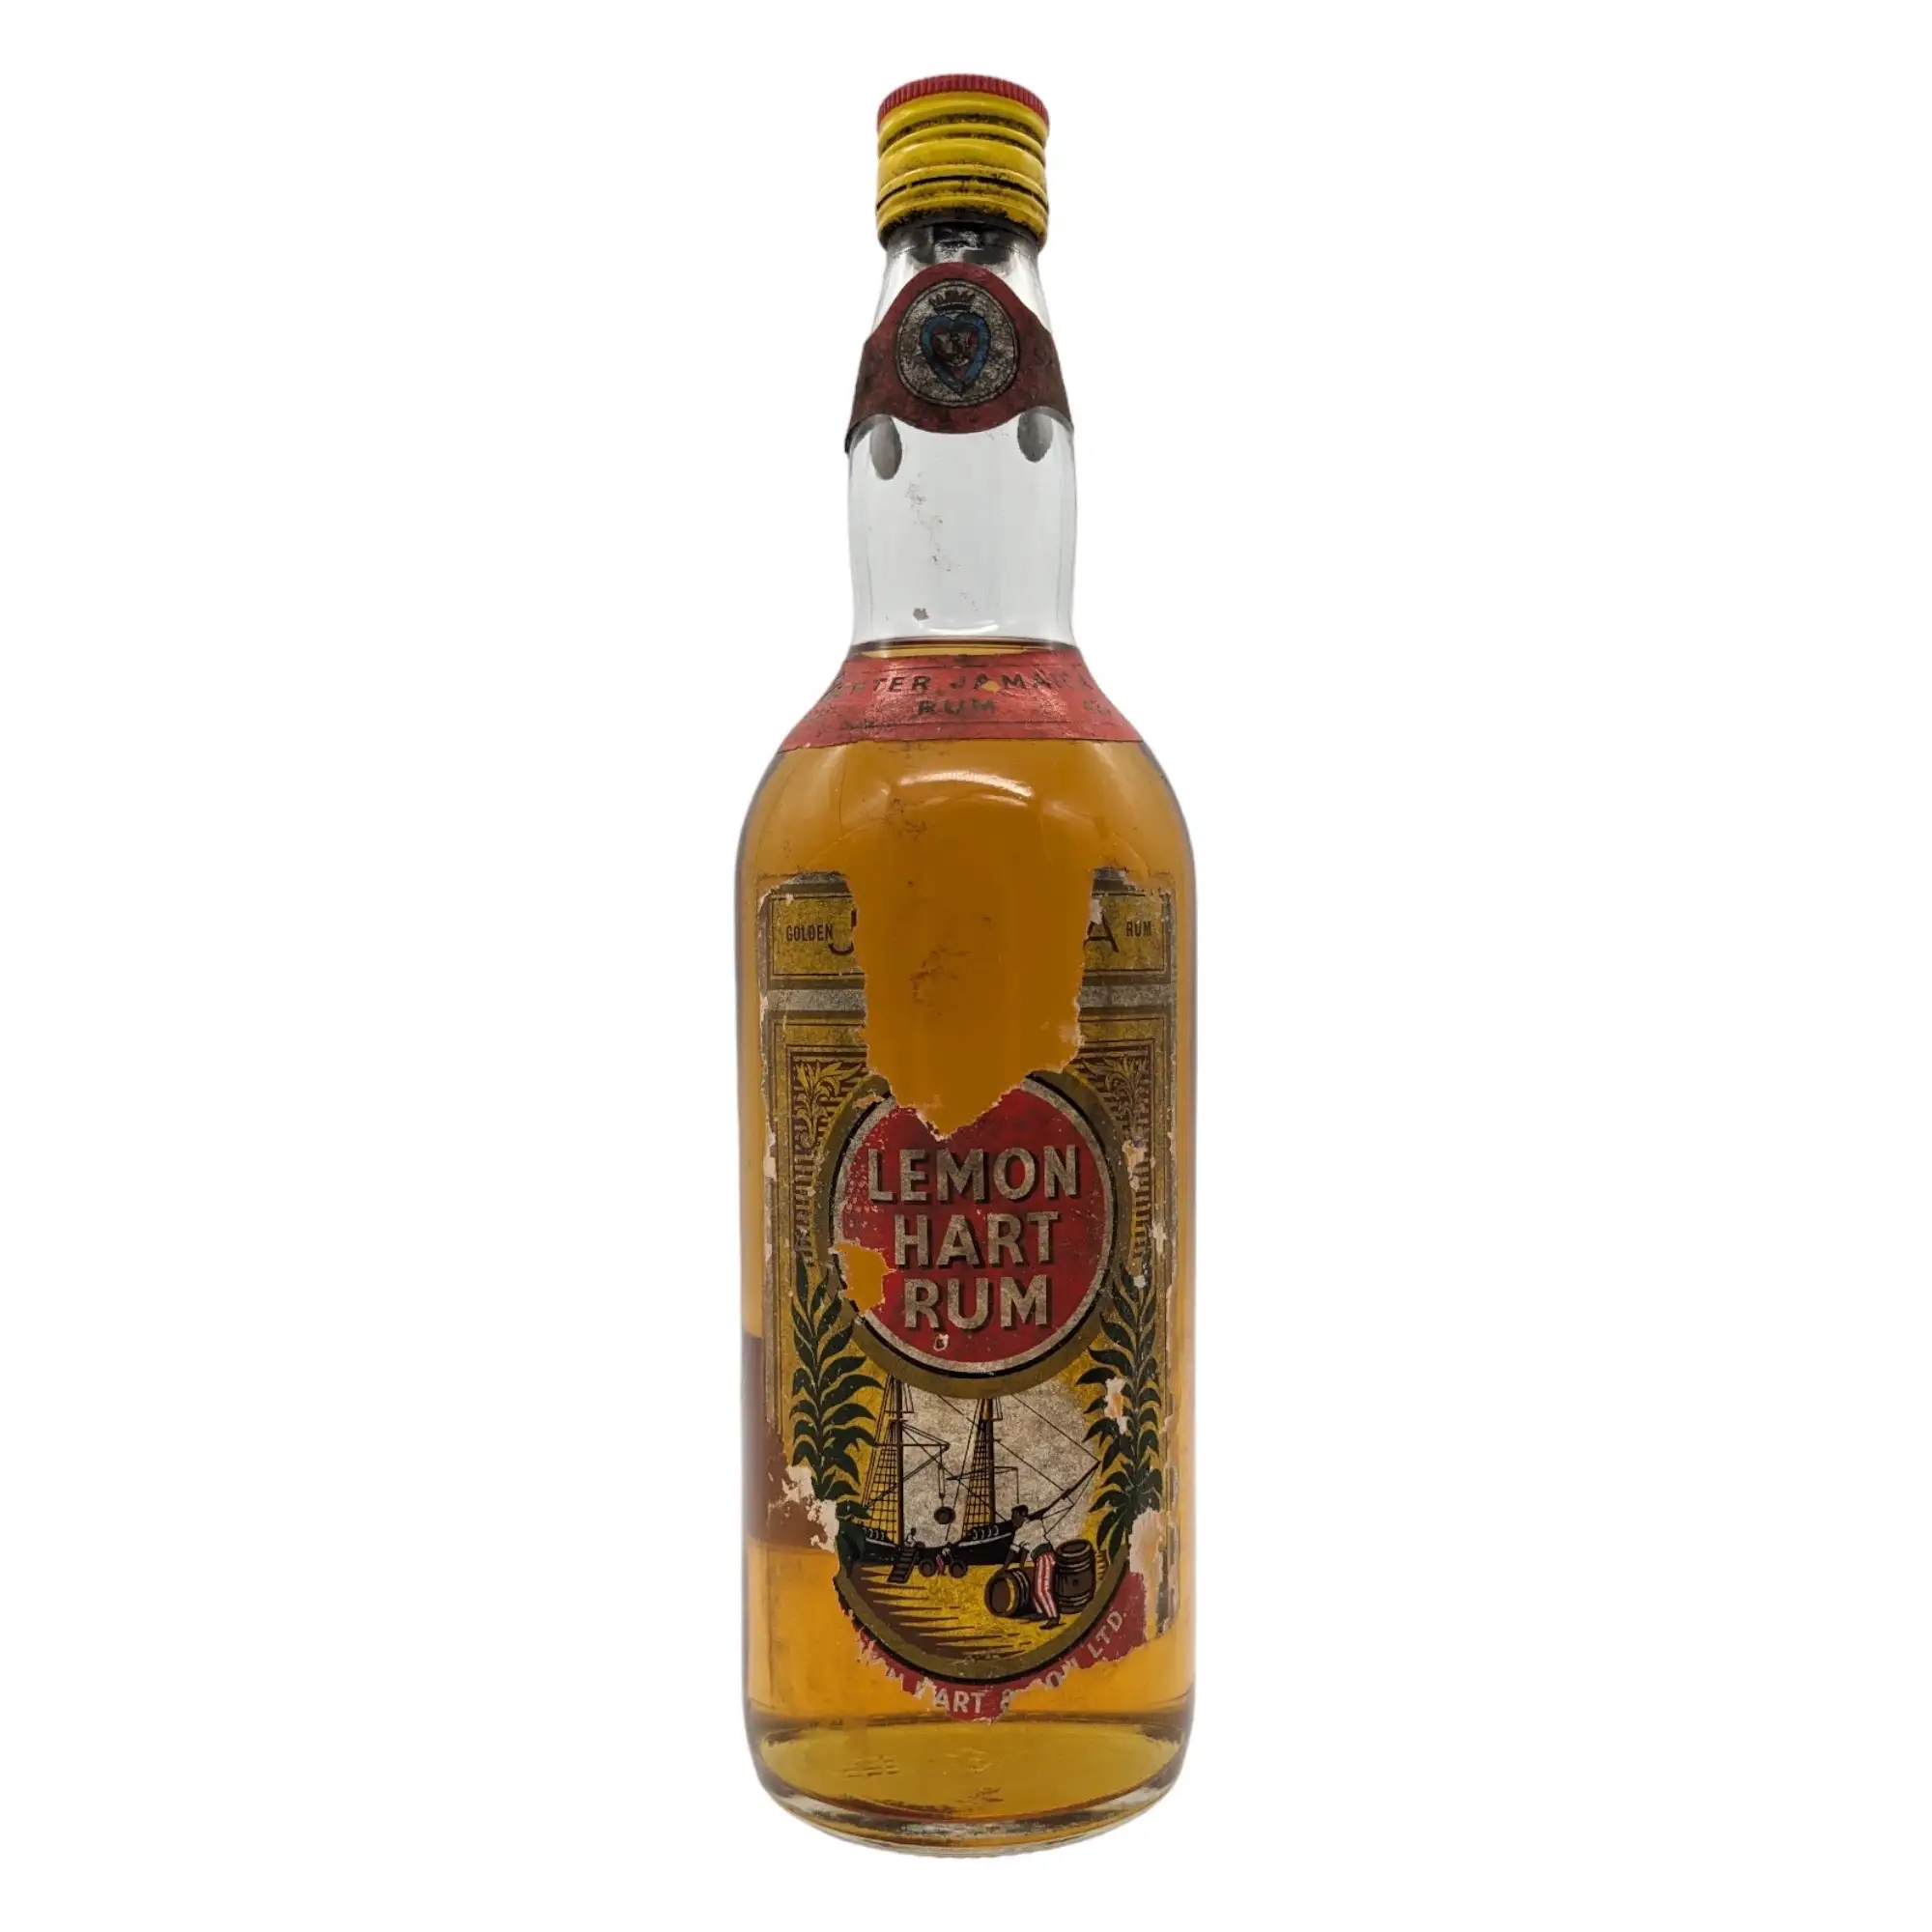 Image of the front of the bottle of the rum Golden Jamaica Rum